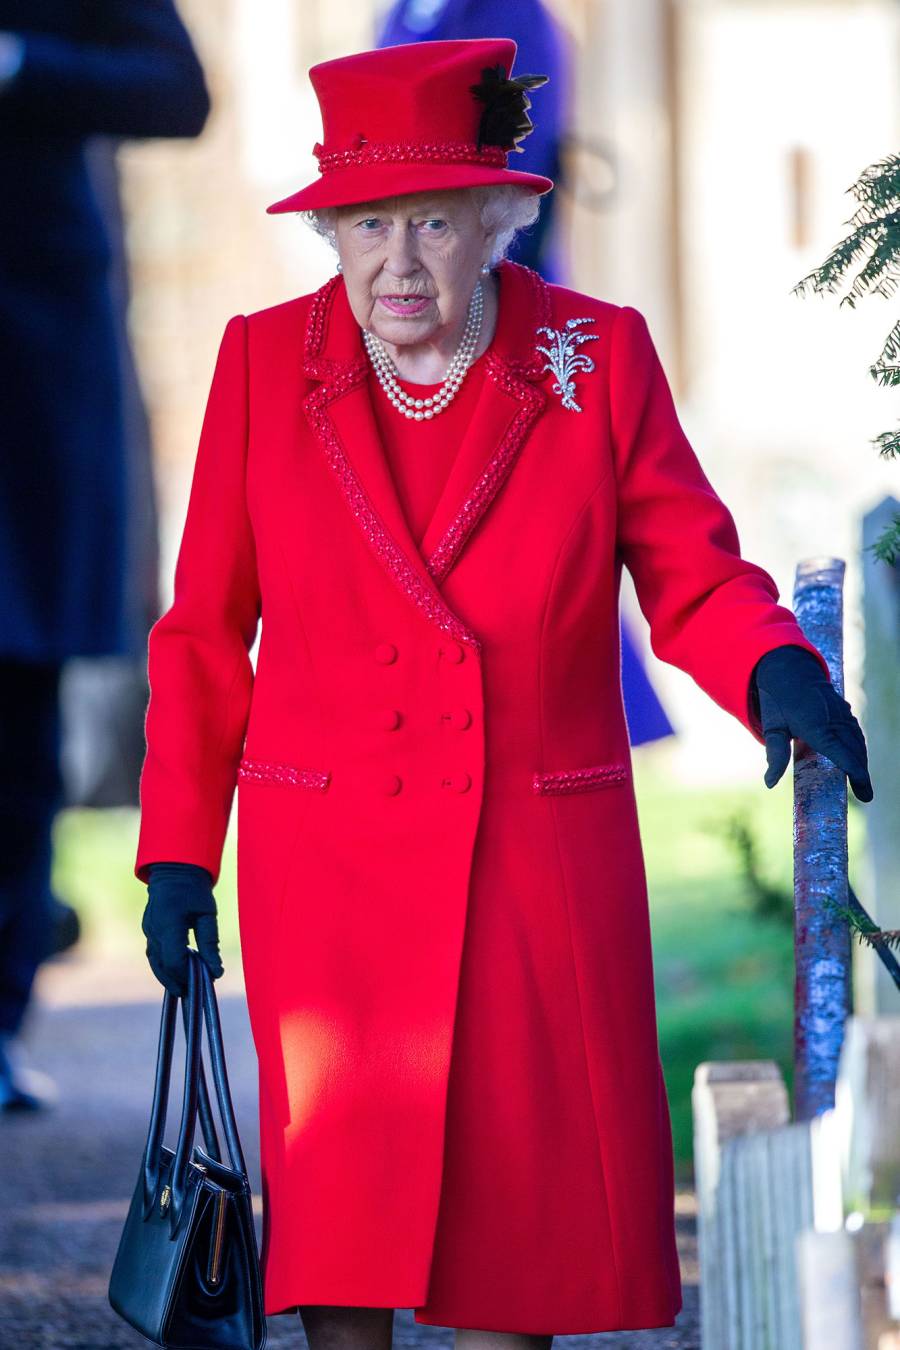 Queen Elizabeth II How the Royal Family Has Been Affected by Coronavirus